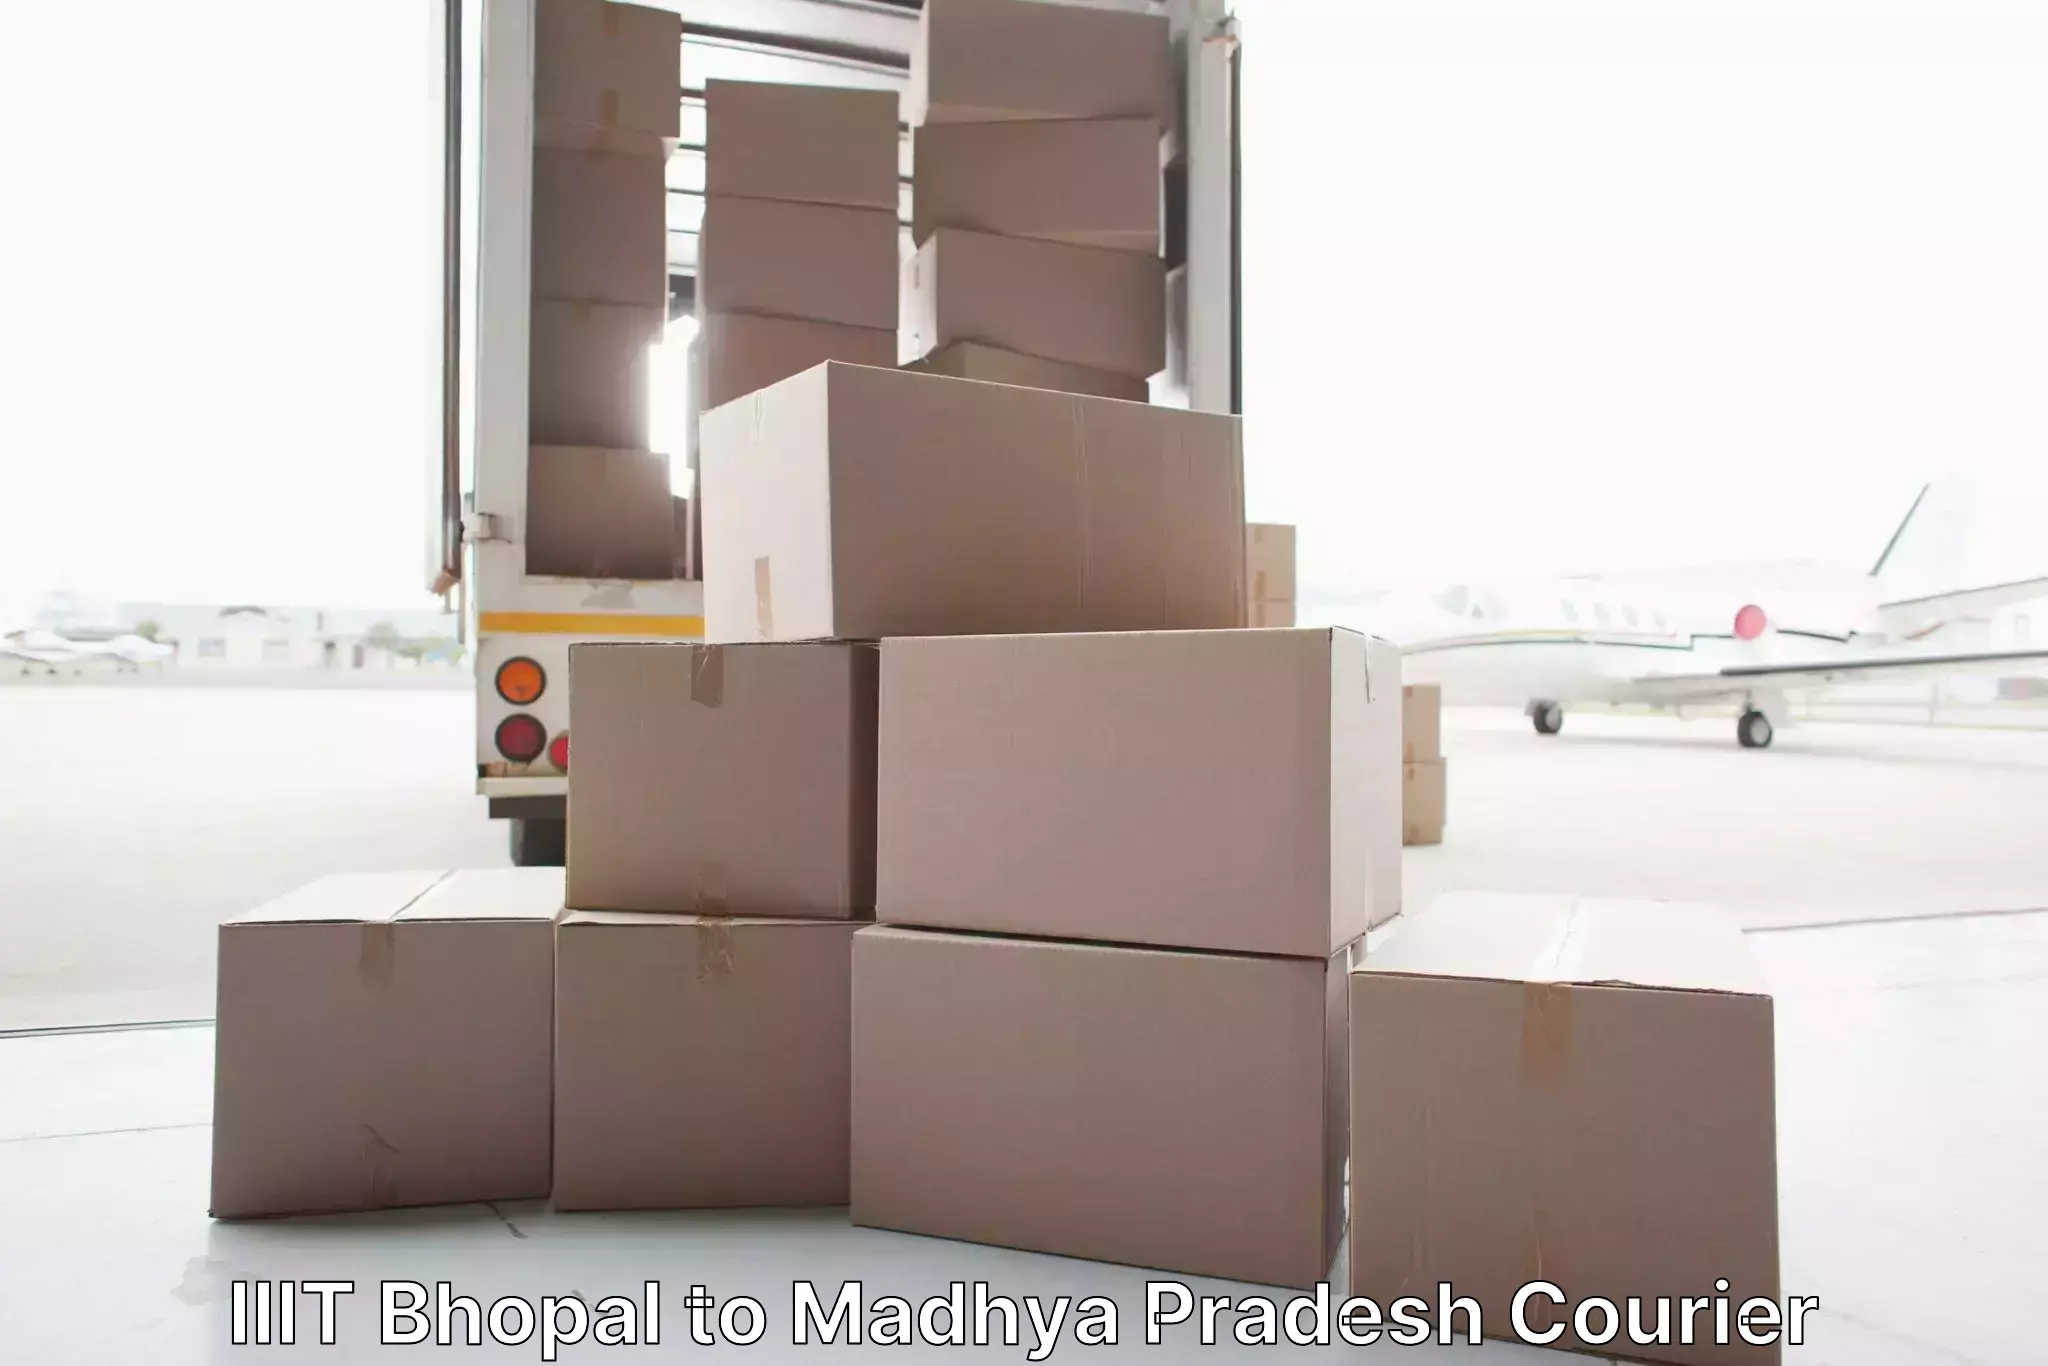 Professional moving assistance IIIT Bhopal to Madhya Pradesh